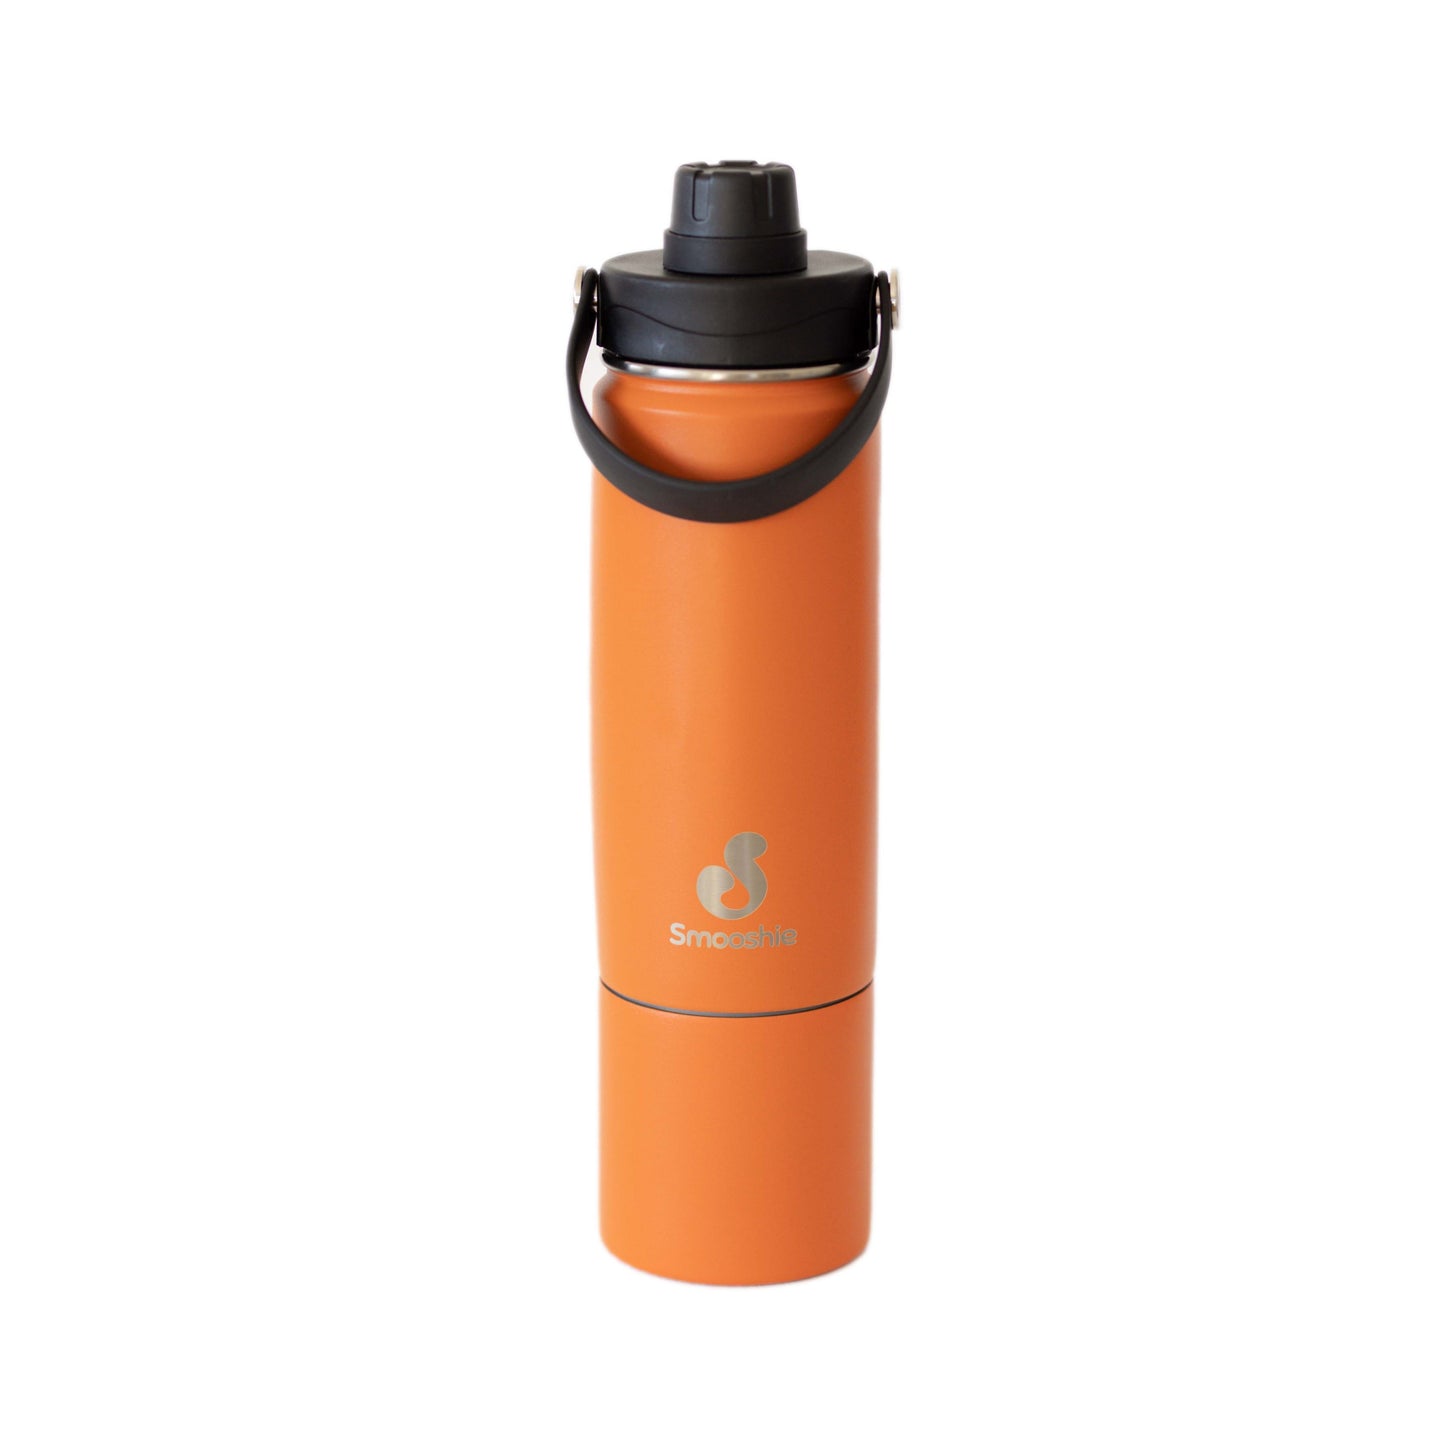 Smooshie double insulated bottle